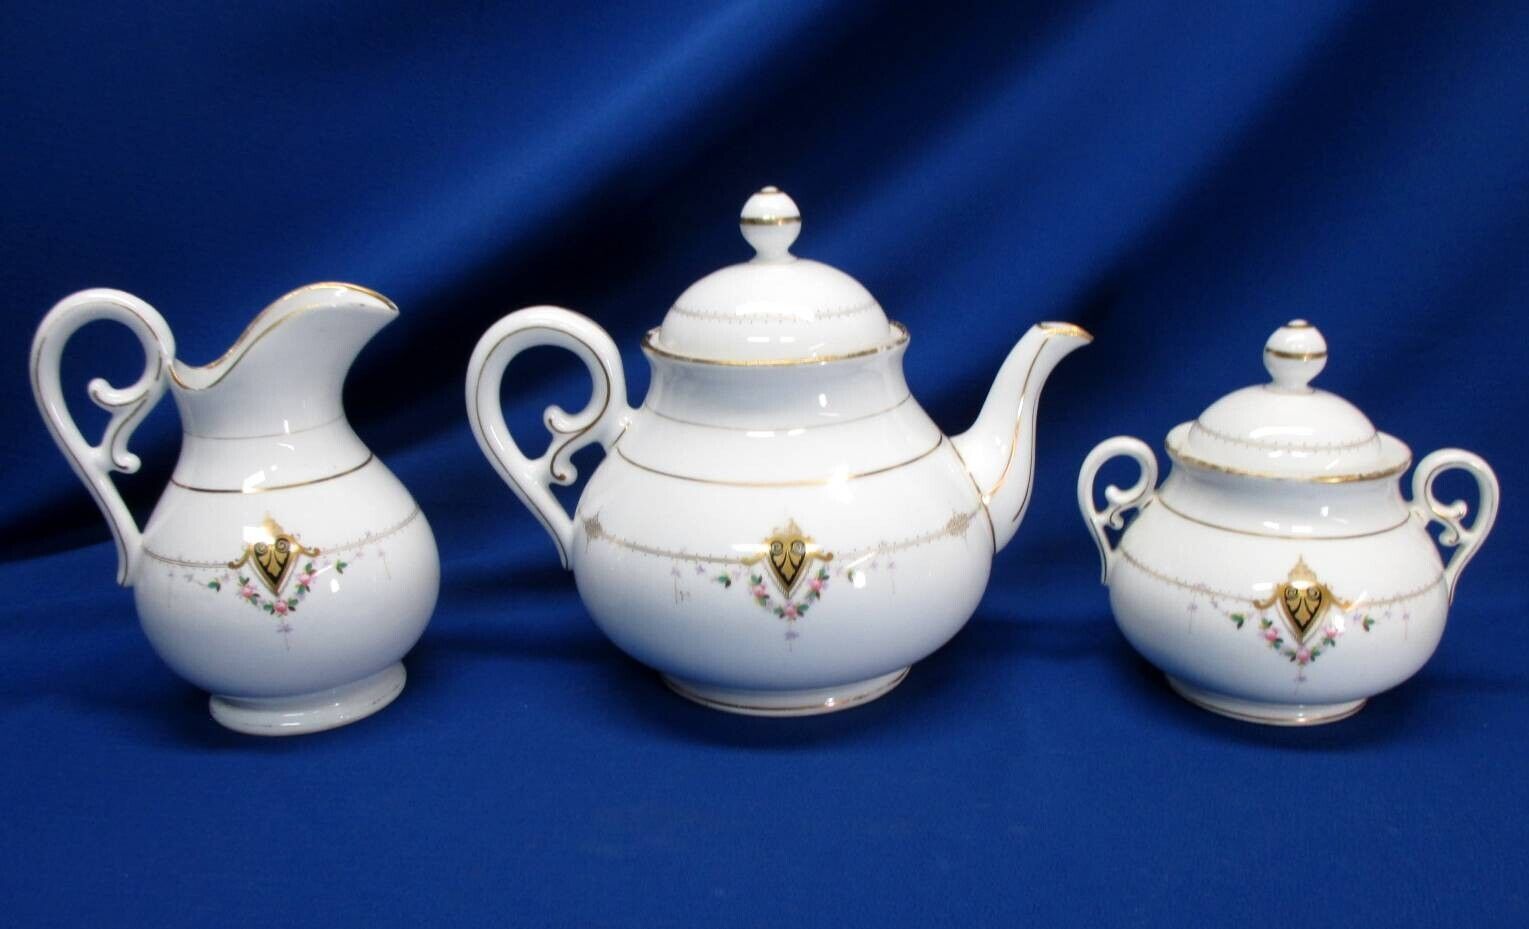 3 PC TEASET BAVARIAN PORCELAIN SHIELD & HAND-PAINTED FLORAL SWAGS